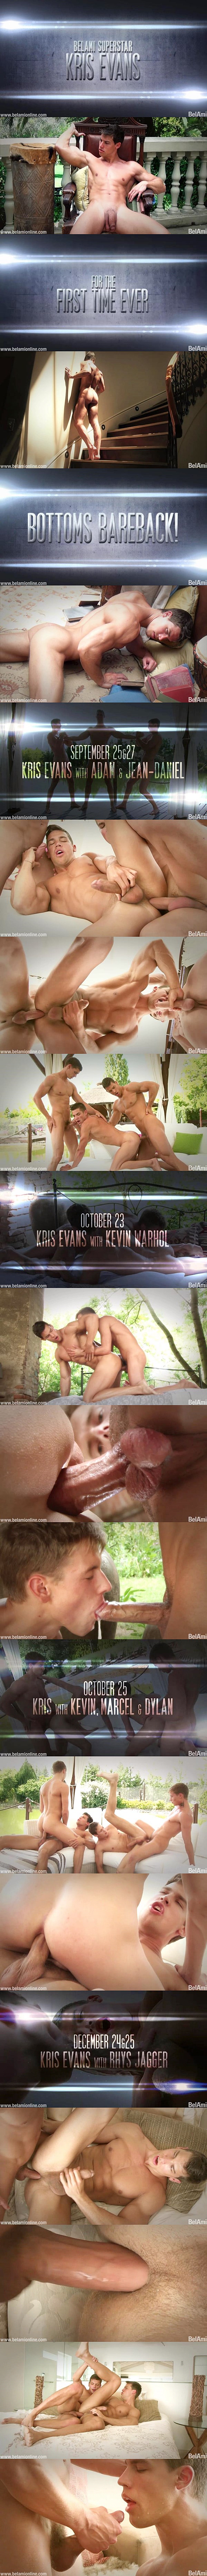 Superstar Kris Evans will get his hot bubble ass fucked barebacked in 4 upcoming scenes at Belamionline 01